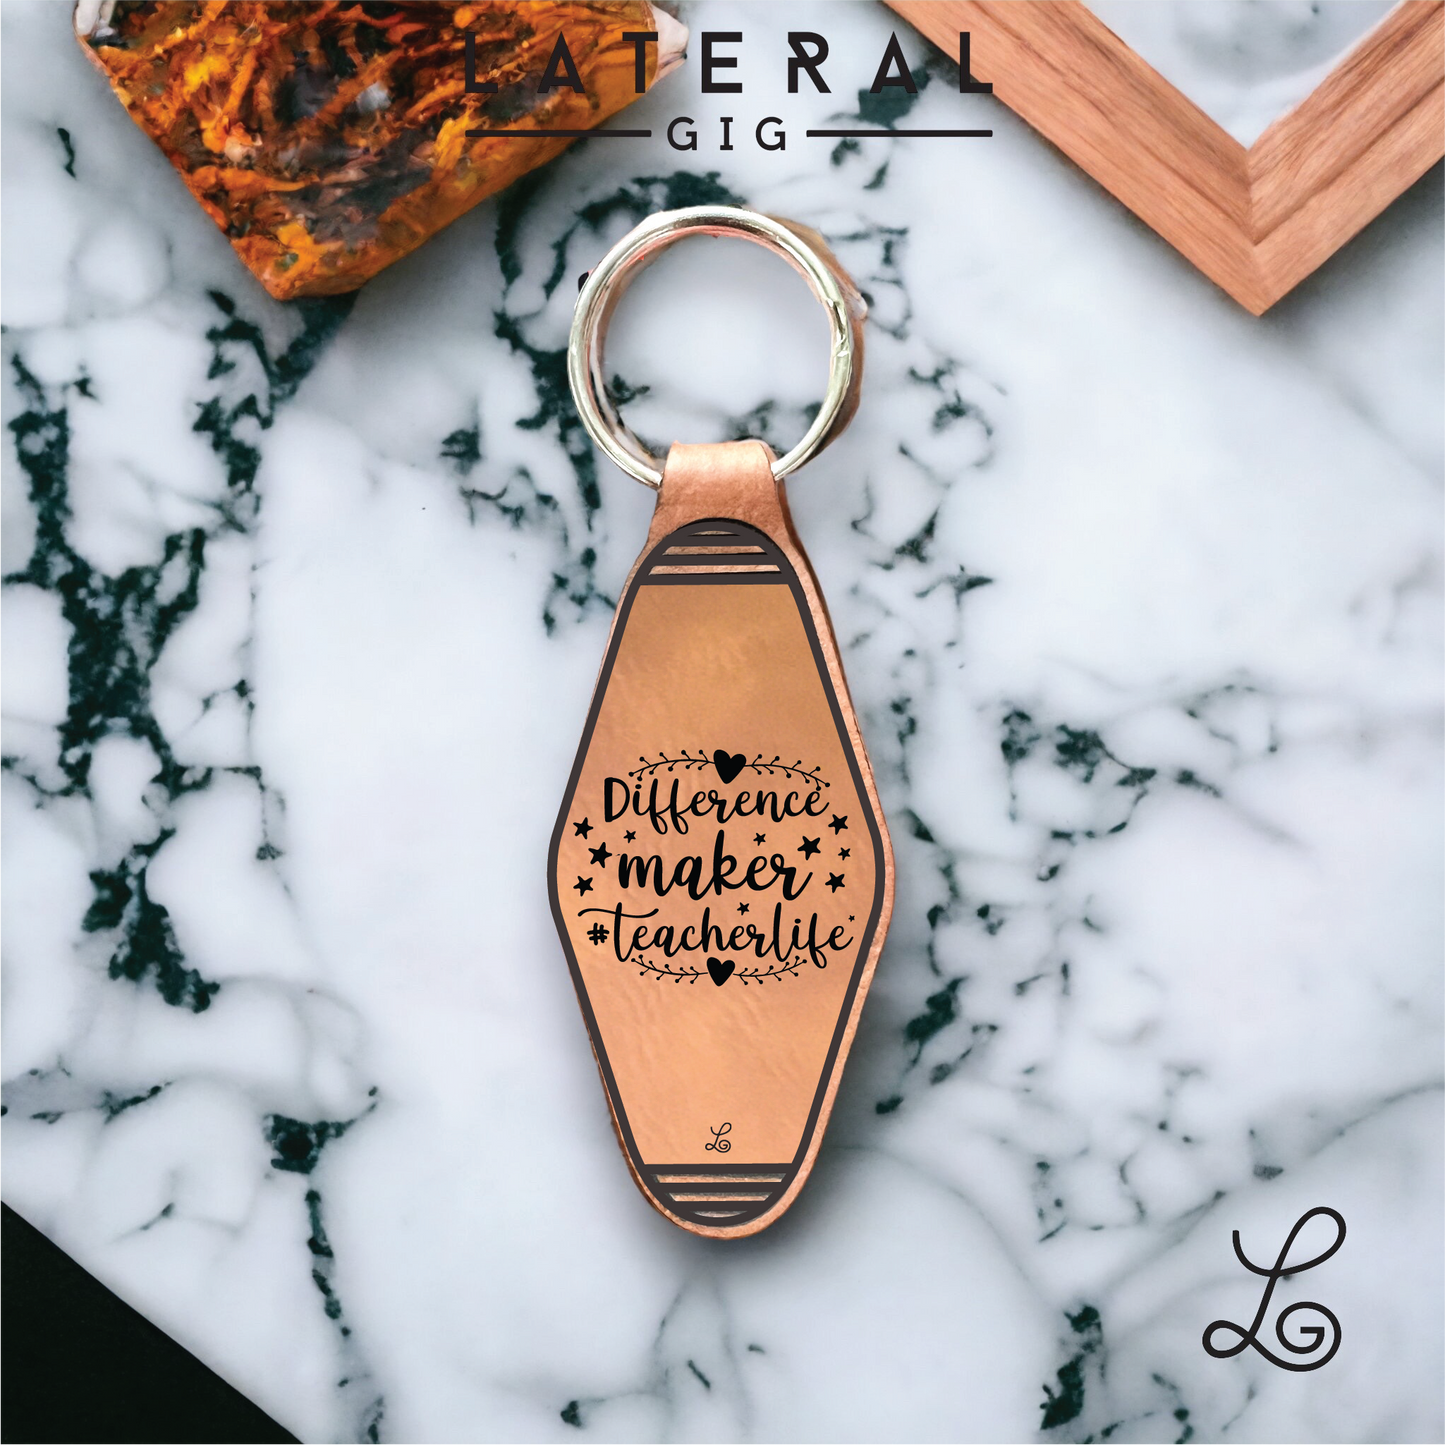 Difference Maker #TeacherLife Leather Keychain